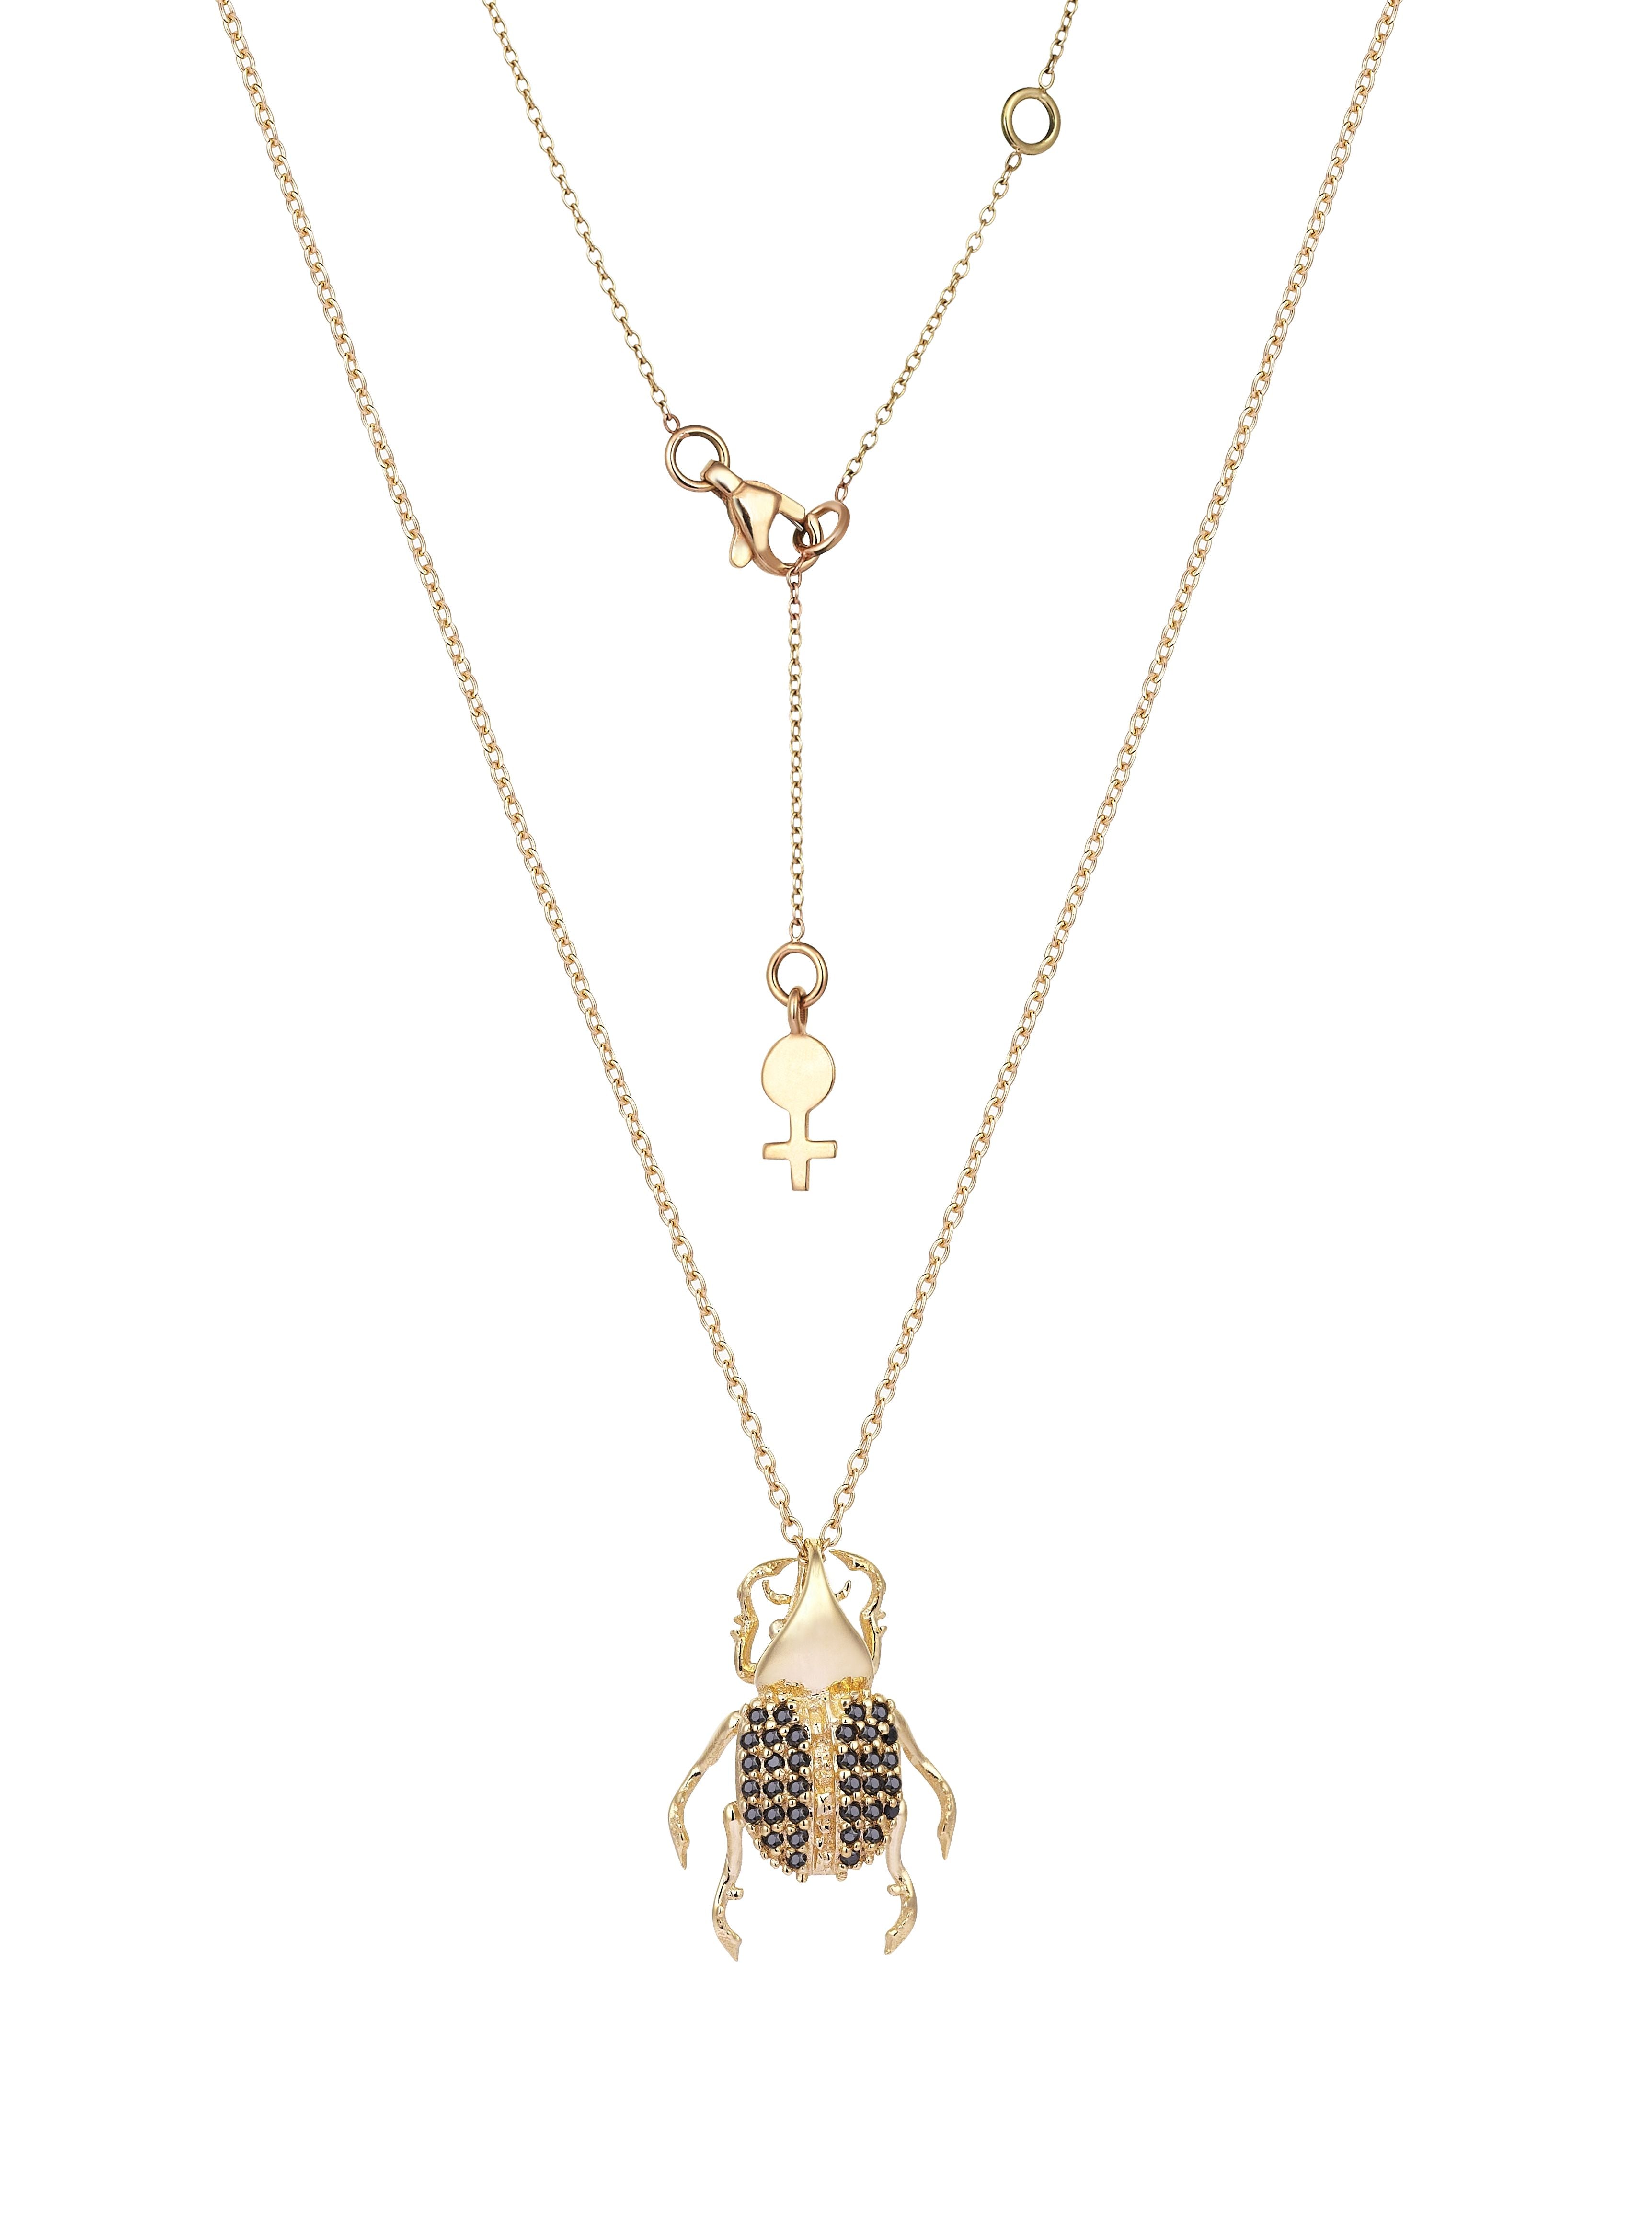 Rhino Beetle Necklace in Yellow Gold - Her Story Shop